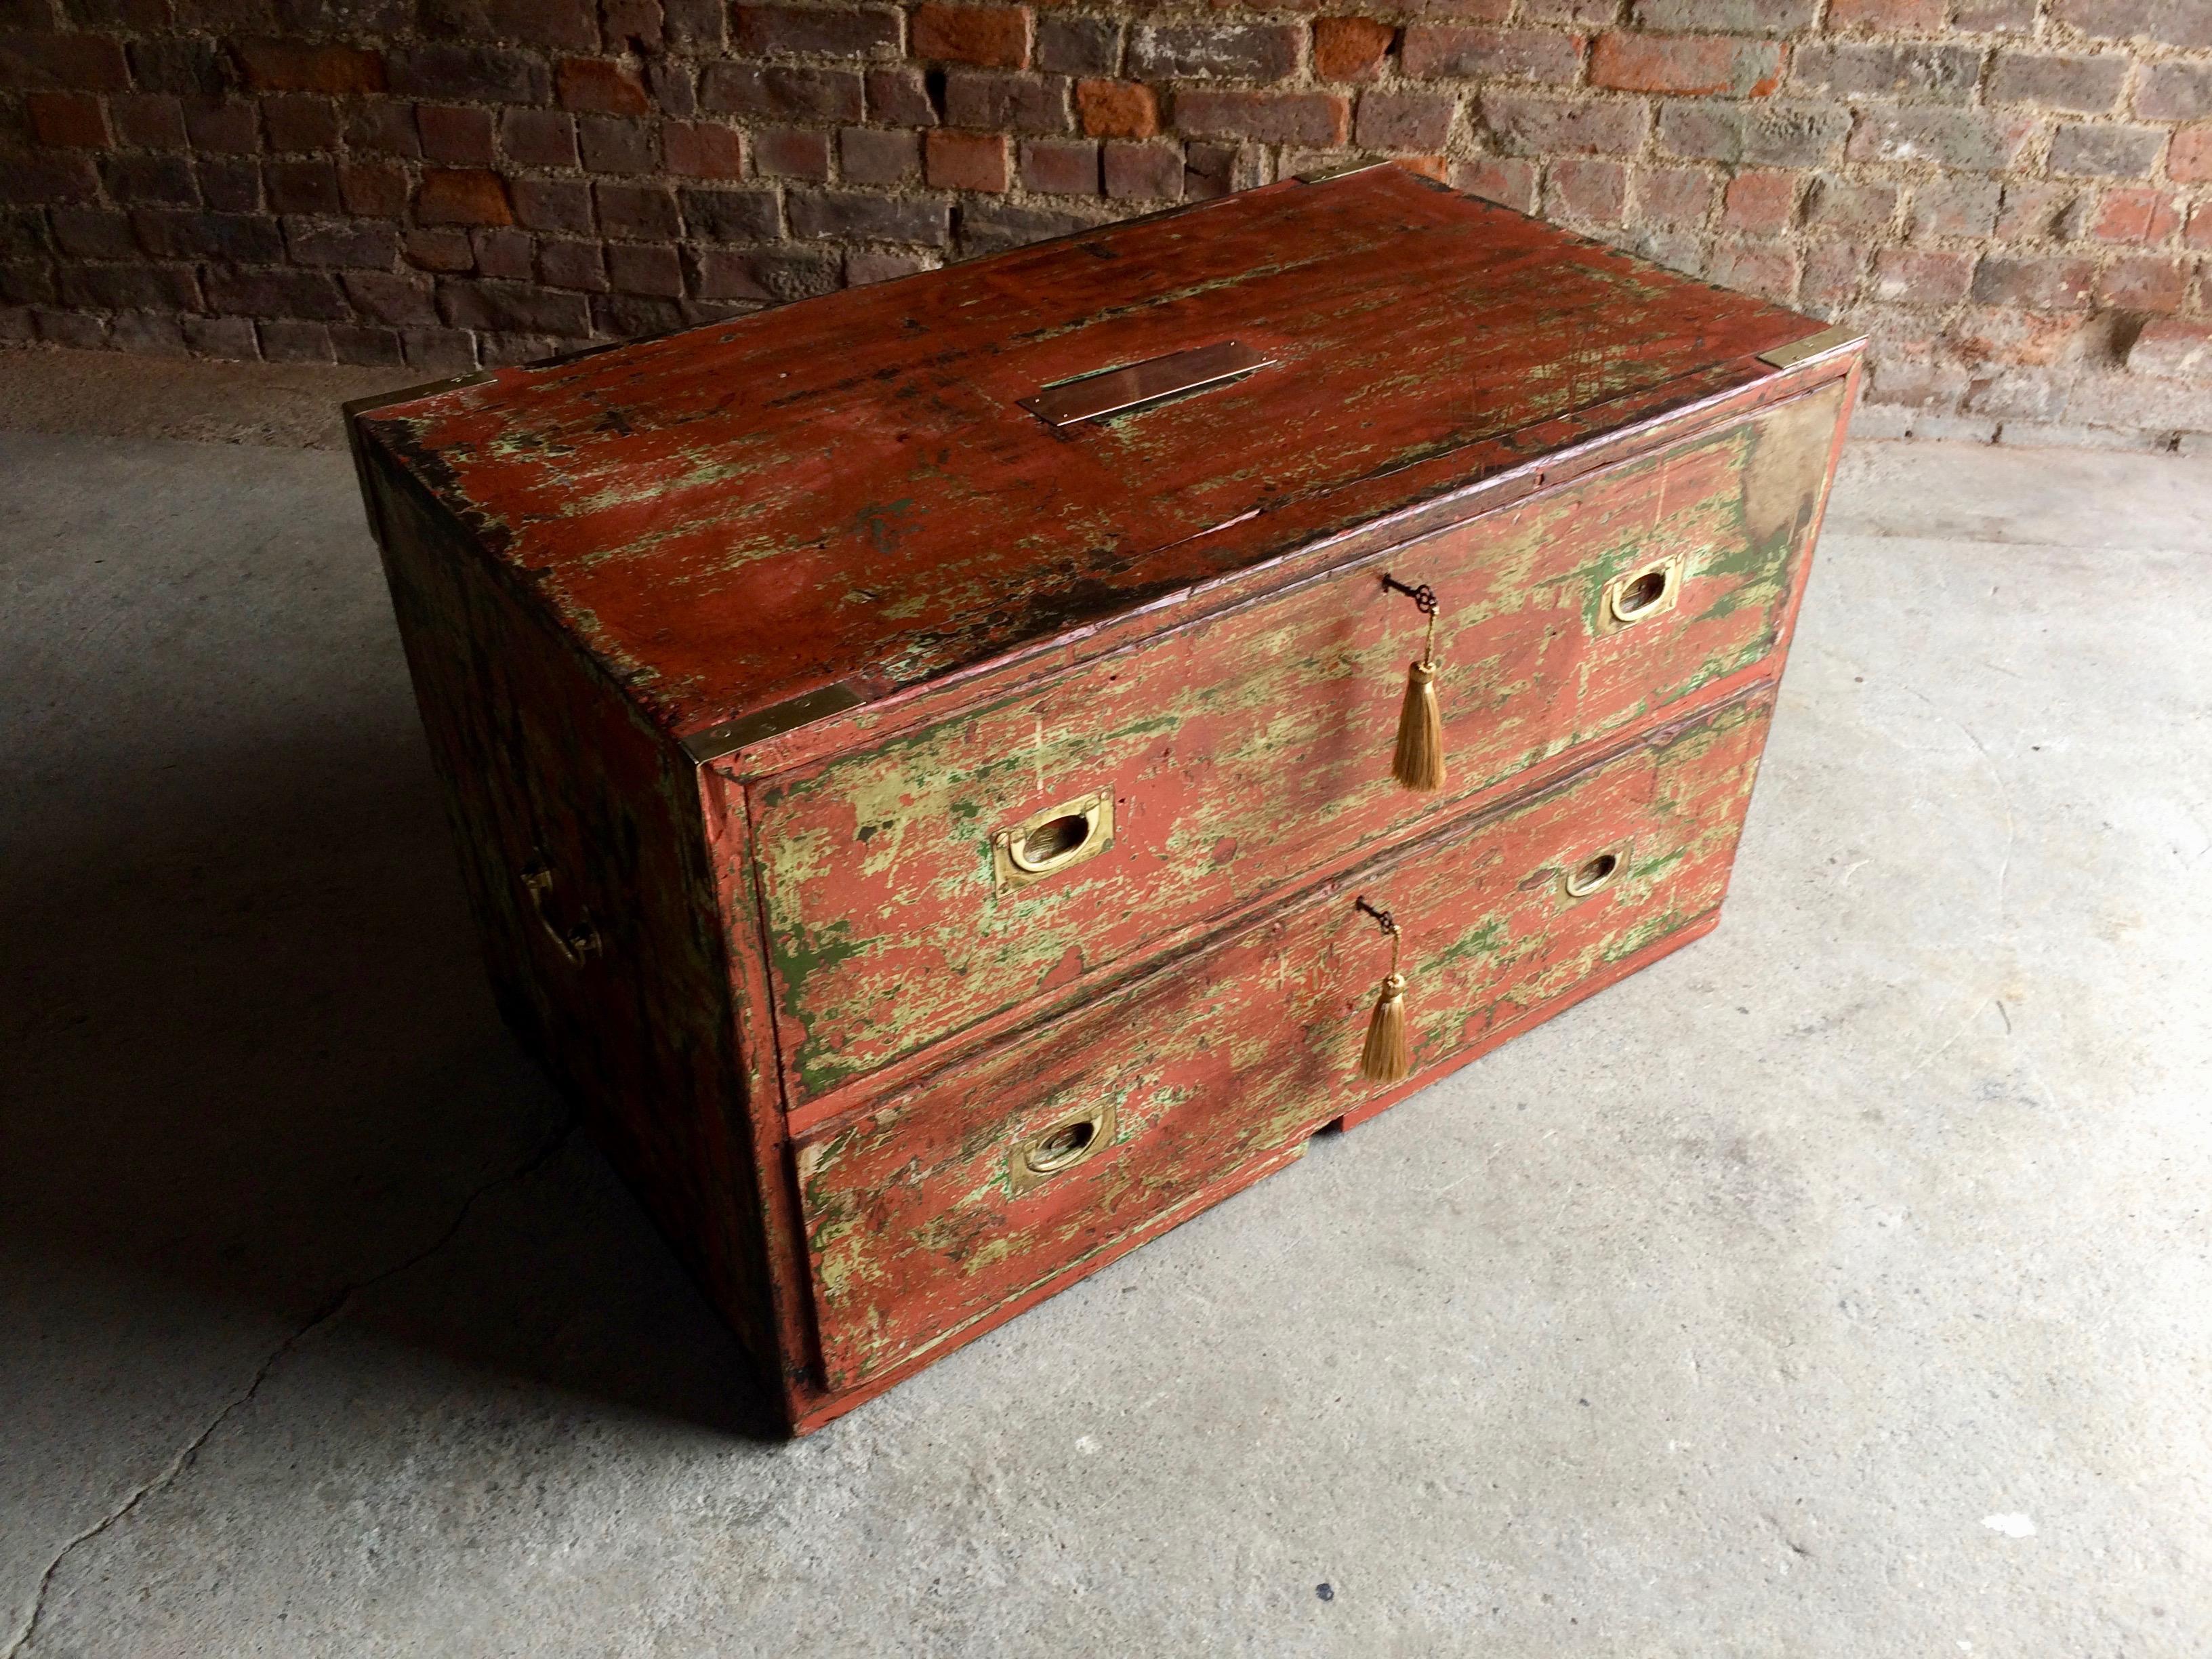 Antique Campaign Chest of Drawers Coffee Table Distressed Painted Victorian In Distressed Condition In Longdon, Tewkesbury